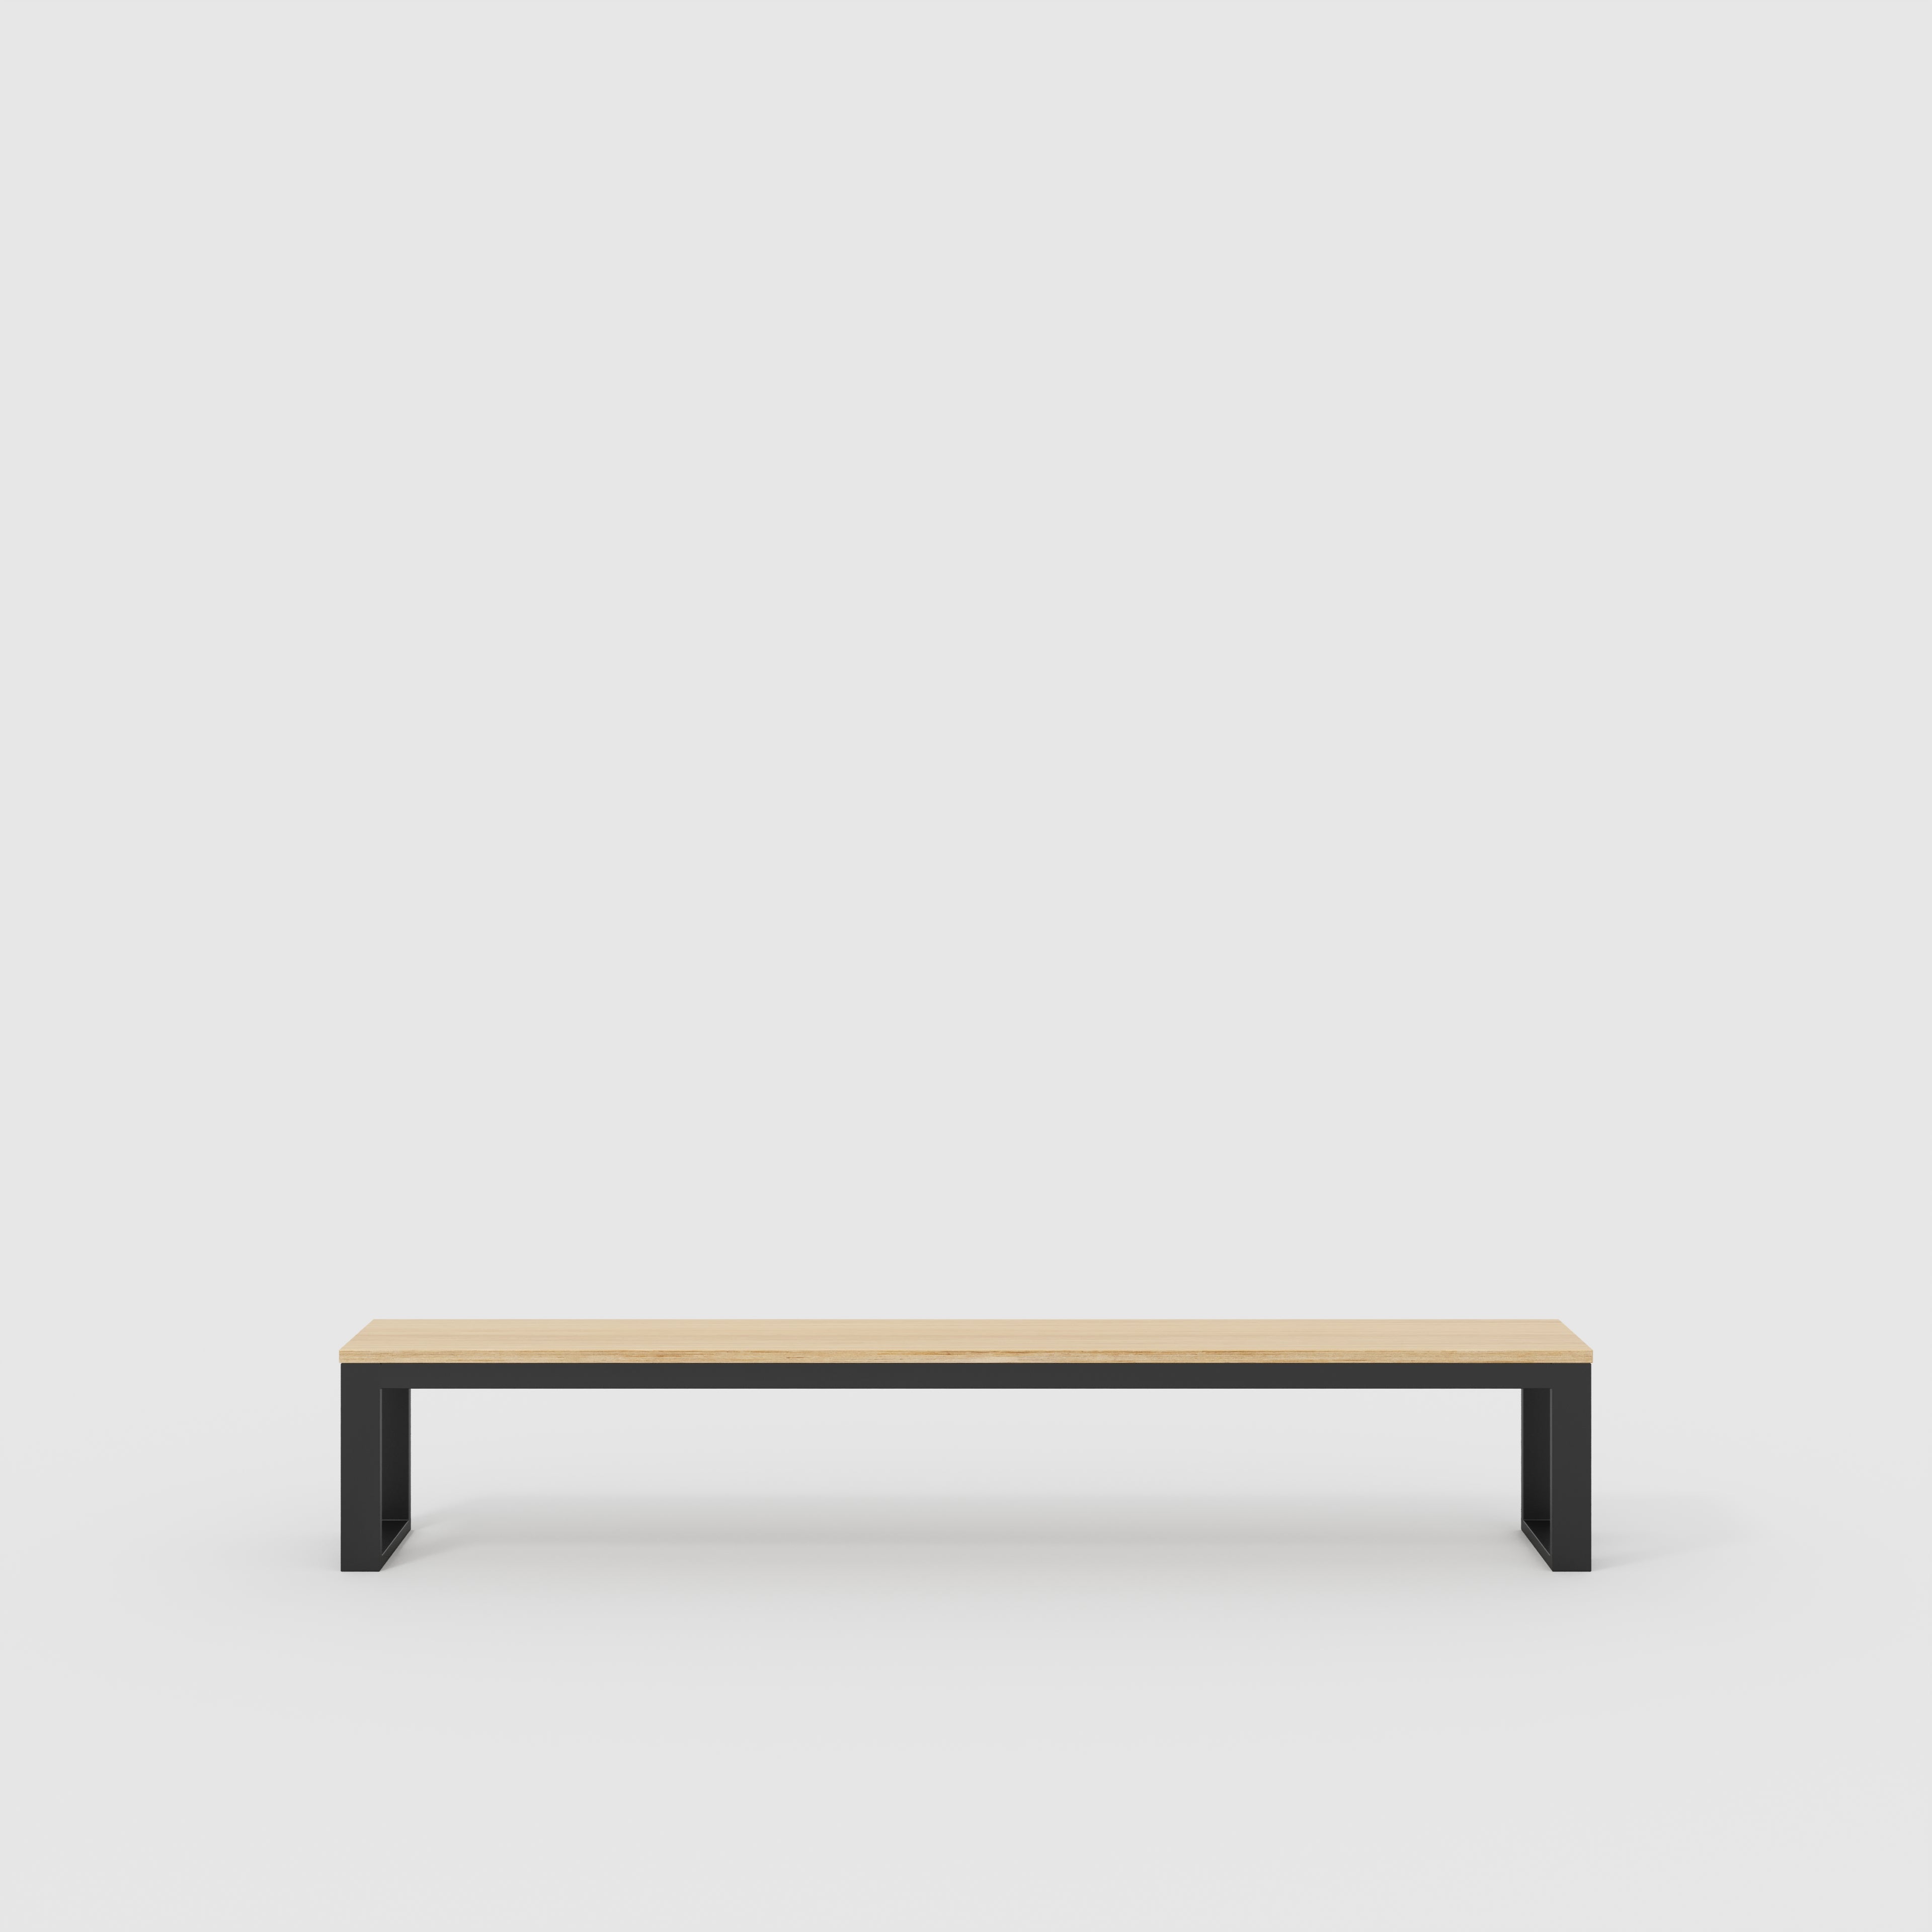 Bench Seat with Black Industrial Frame - Plywood Oak - 2400(w) x 325(d)